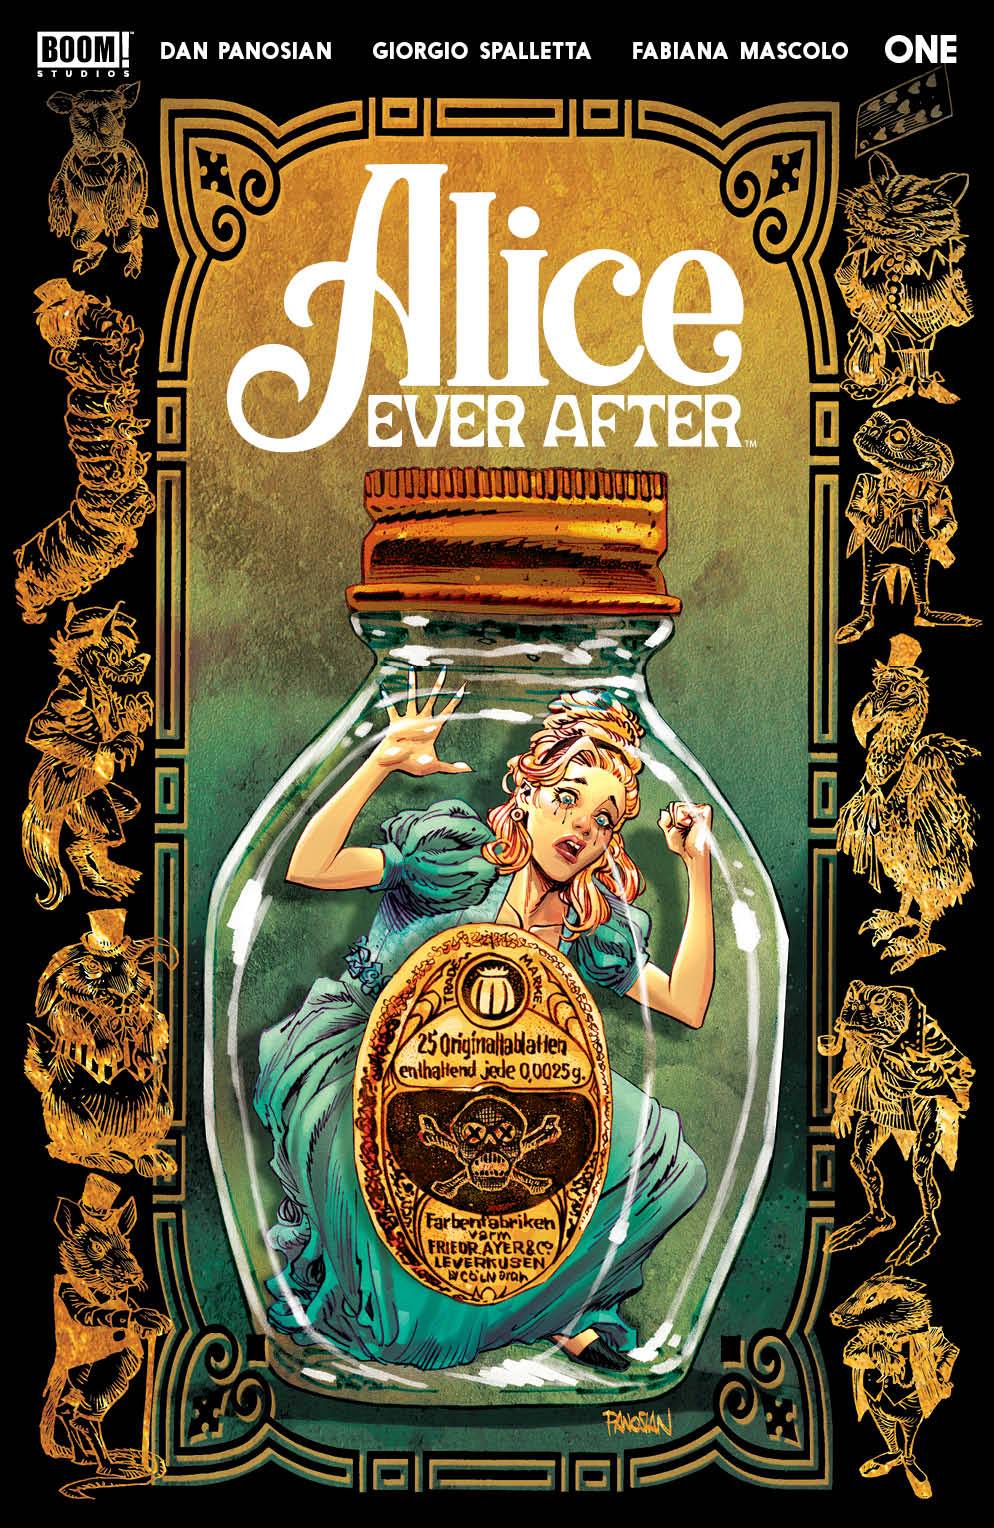 ALICE EVER AFTER #1 (OF 5)